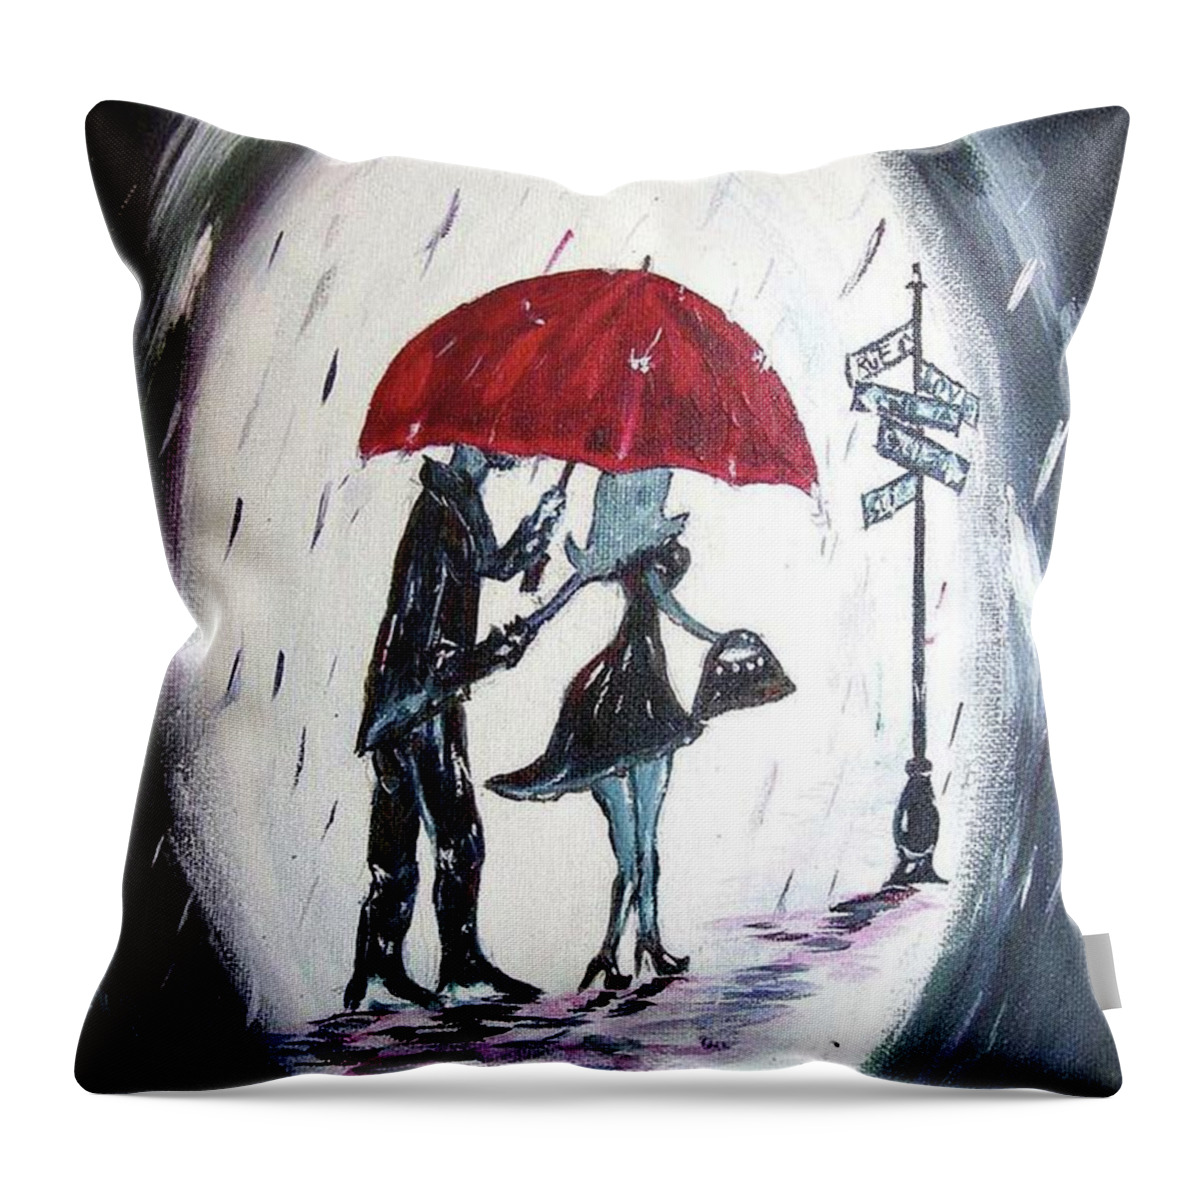 Gentleman Throw Pillow featuring the painting The Gentleman by Roxy Rich